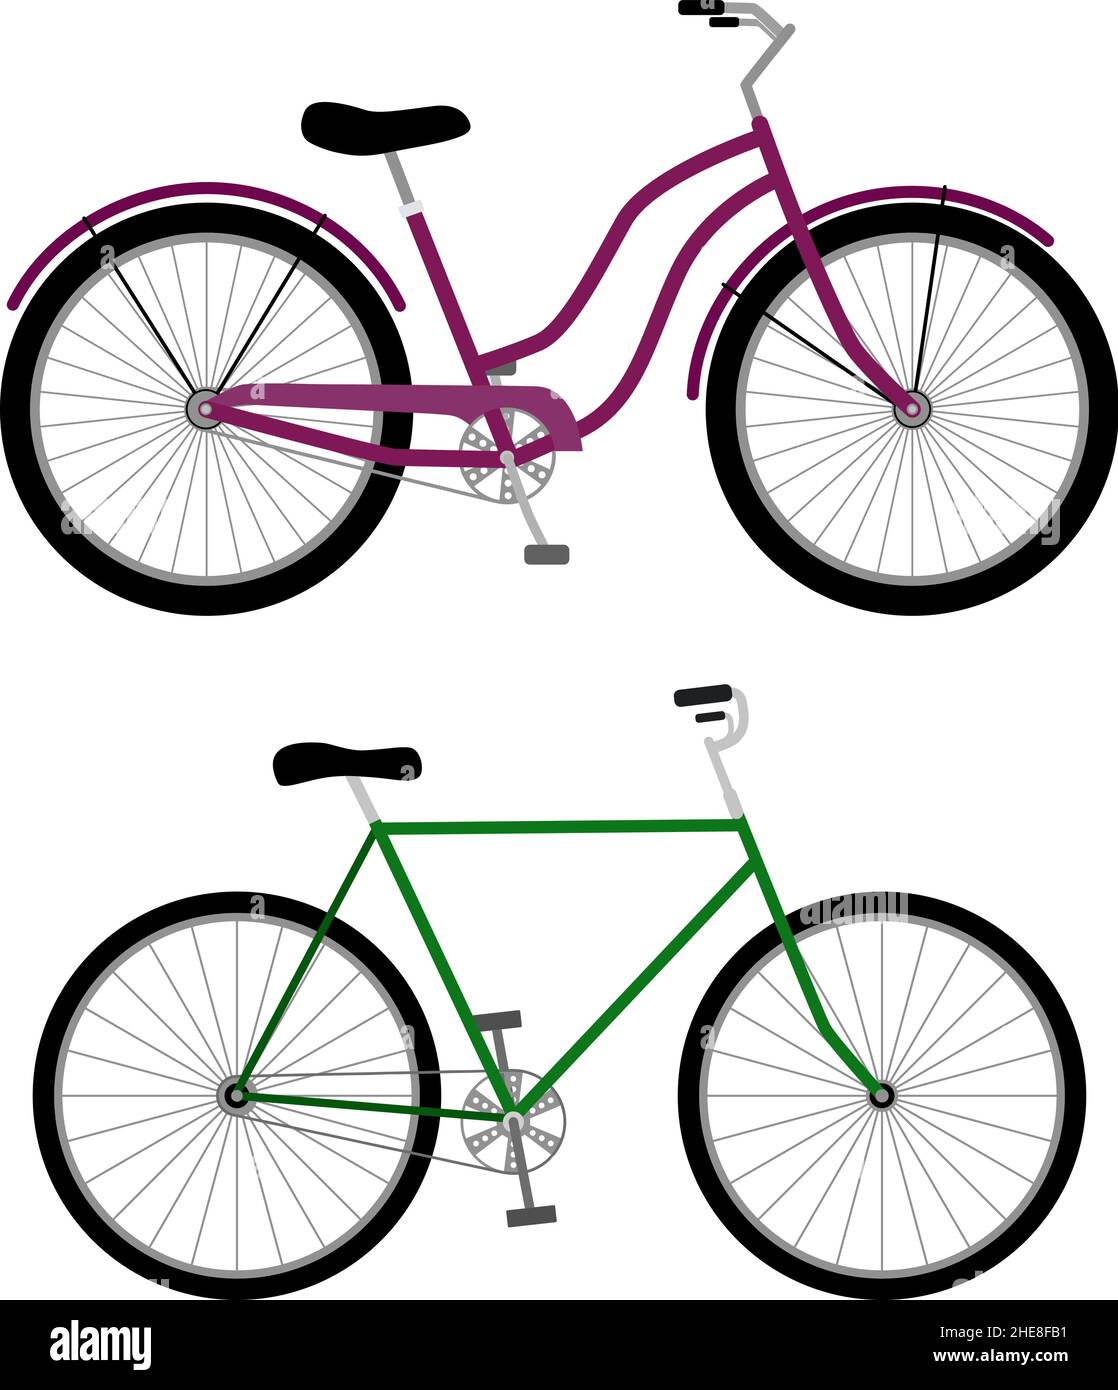 Bicycle icons, vector illustration Stock Vector